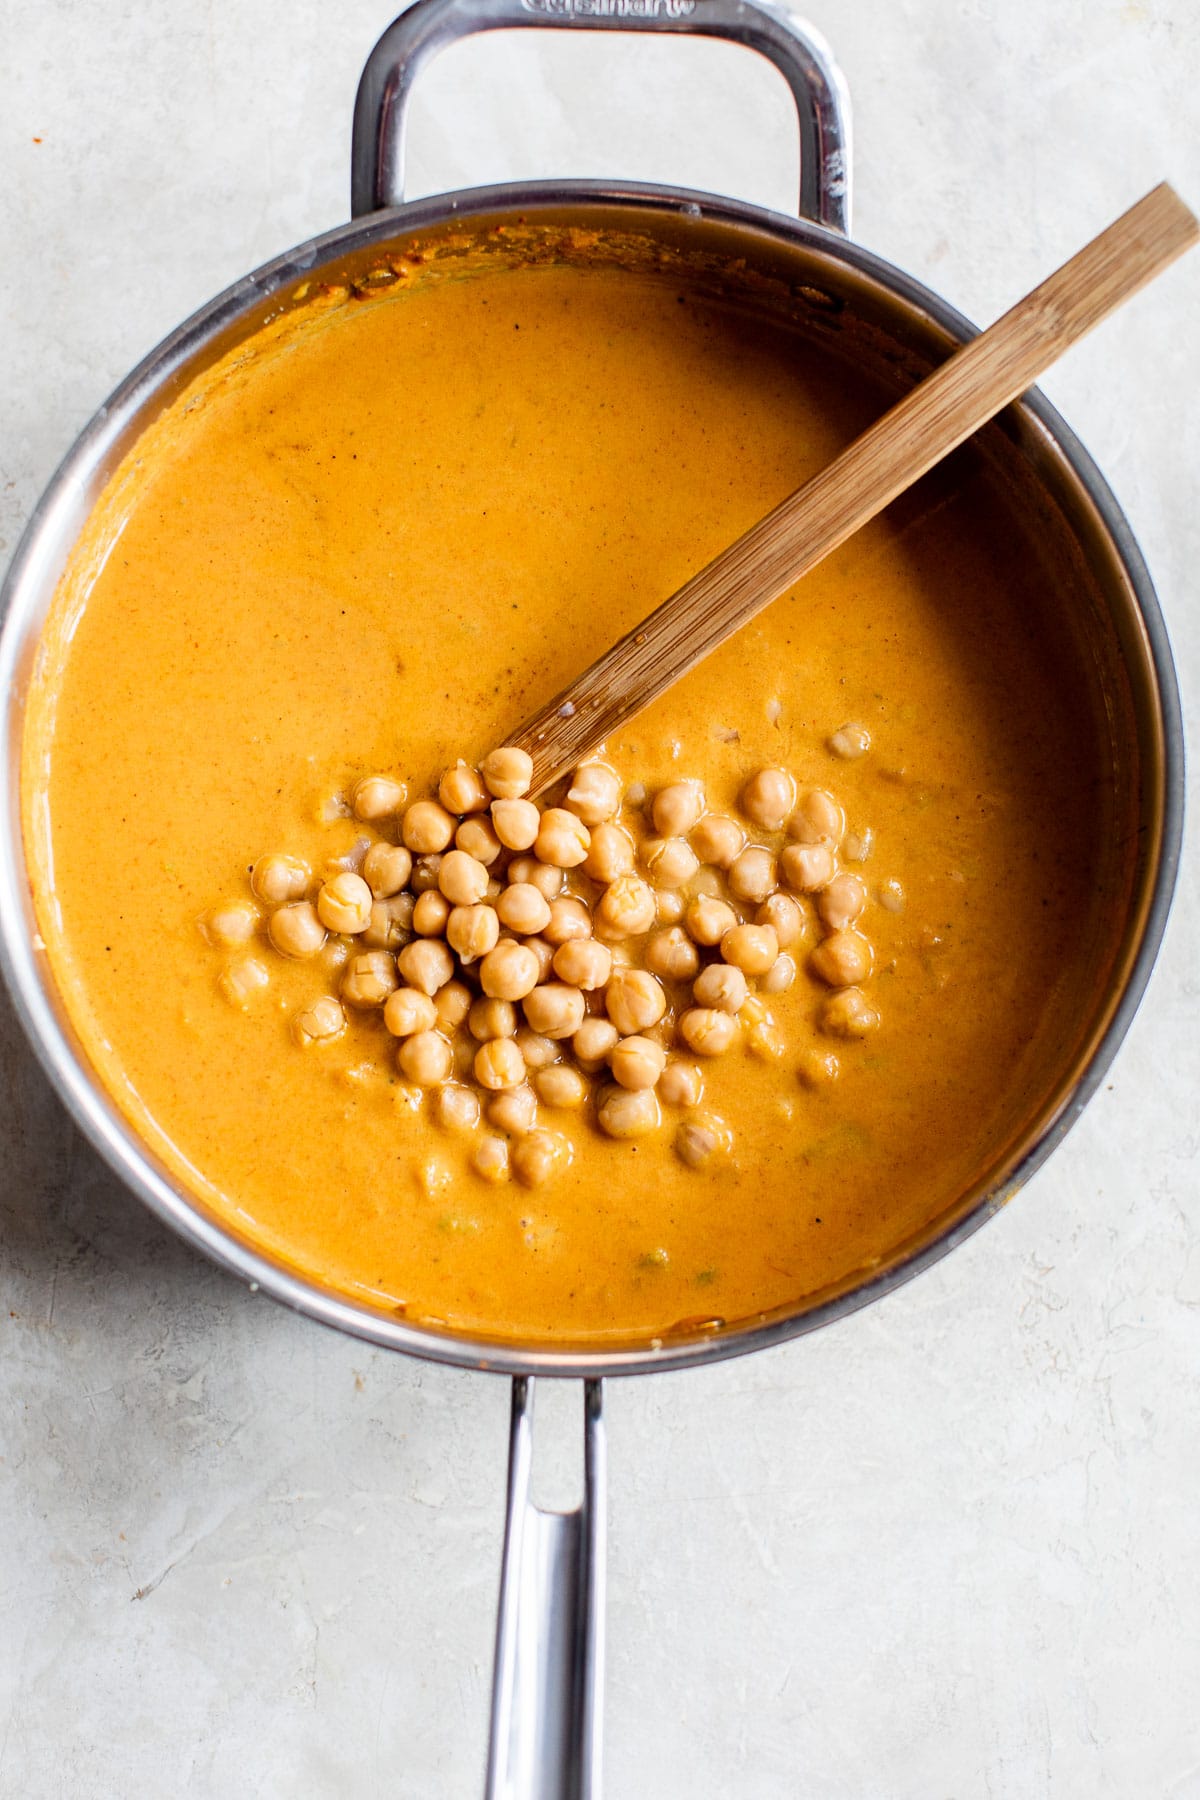 chickpeas in a skillet with orange-colored sauce